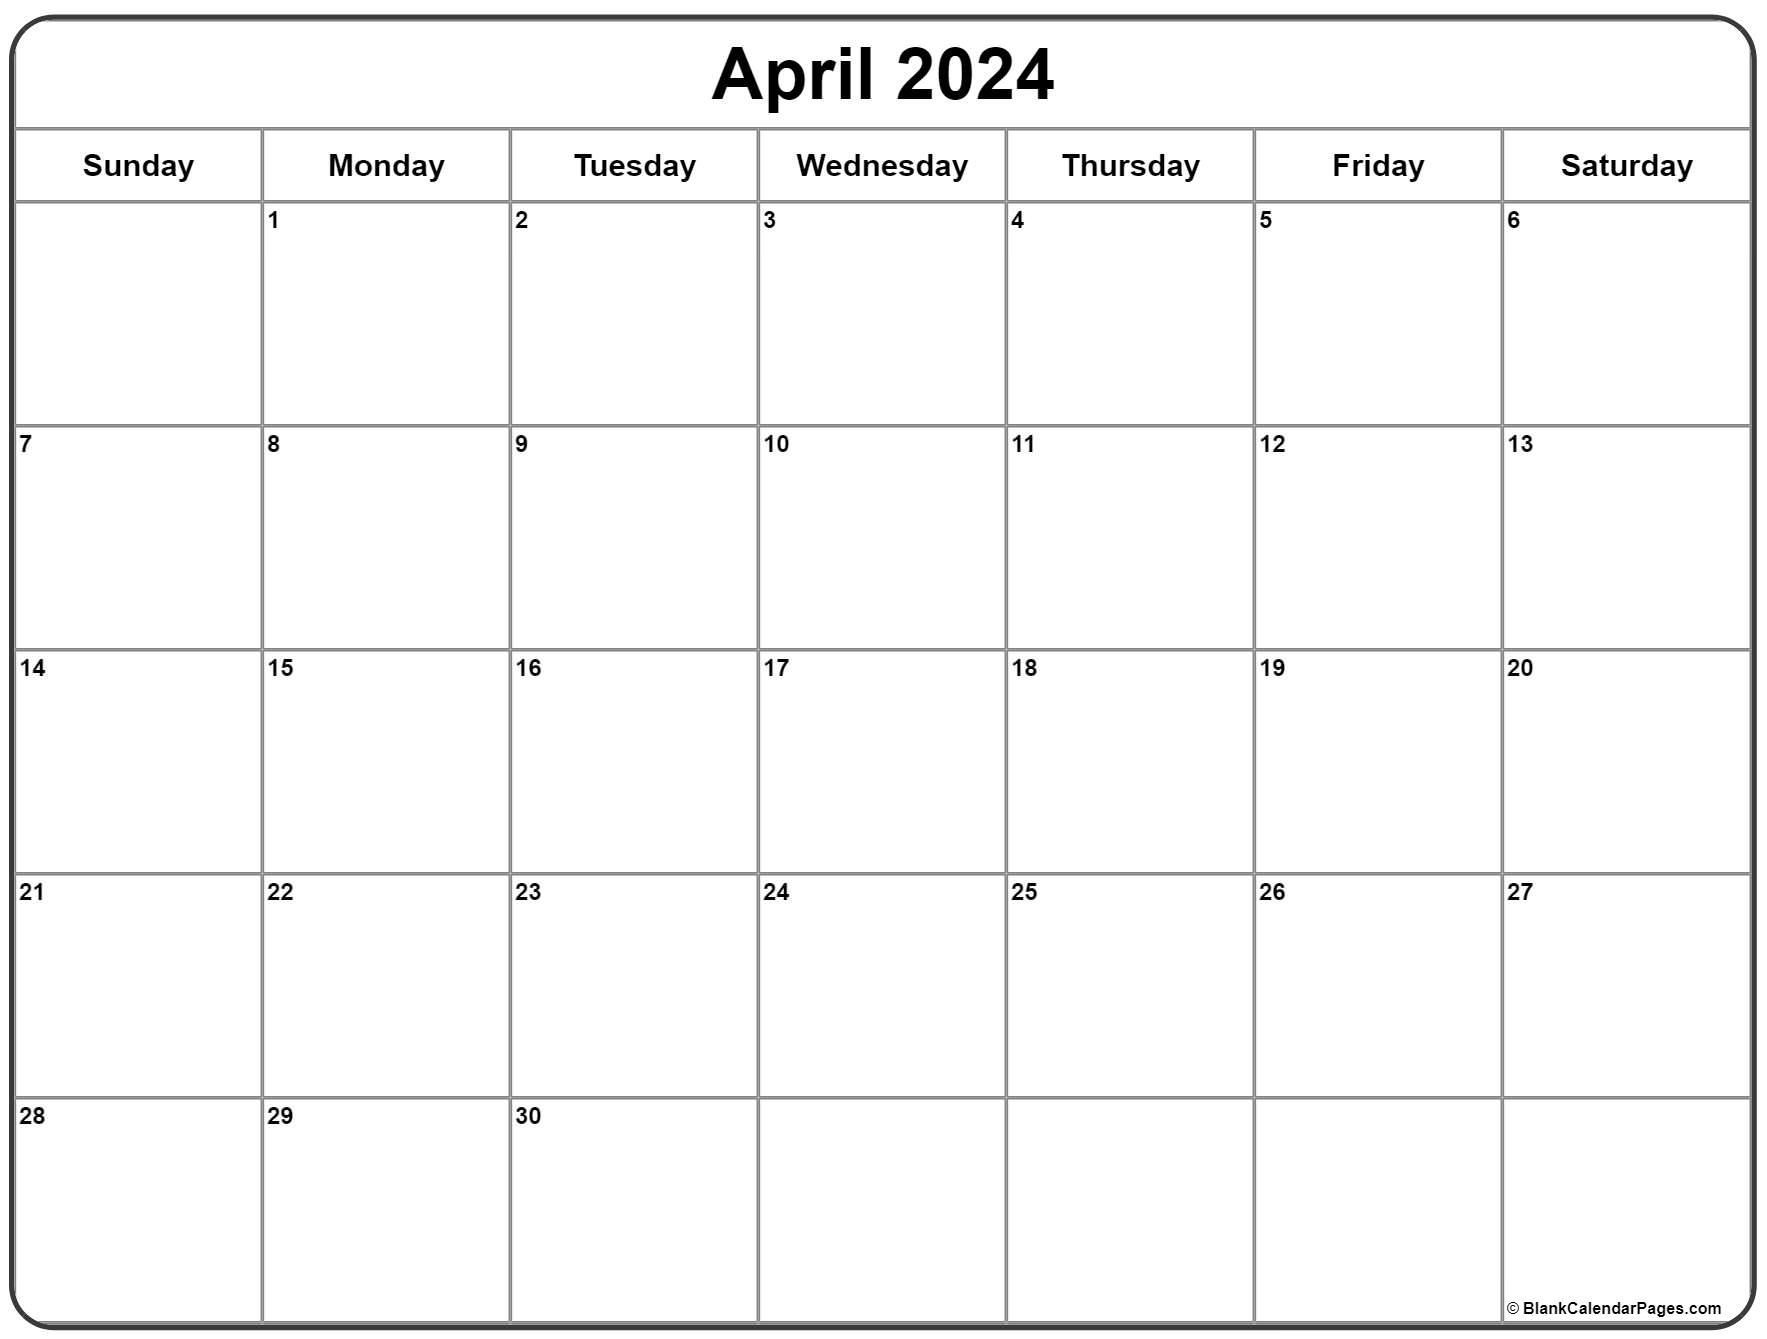 blank-calendar-2023-printable-monthly-april-imagesee